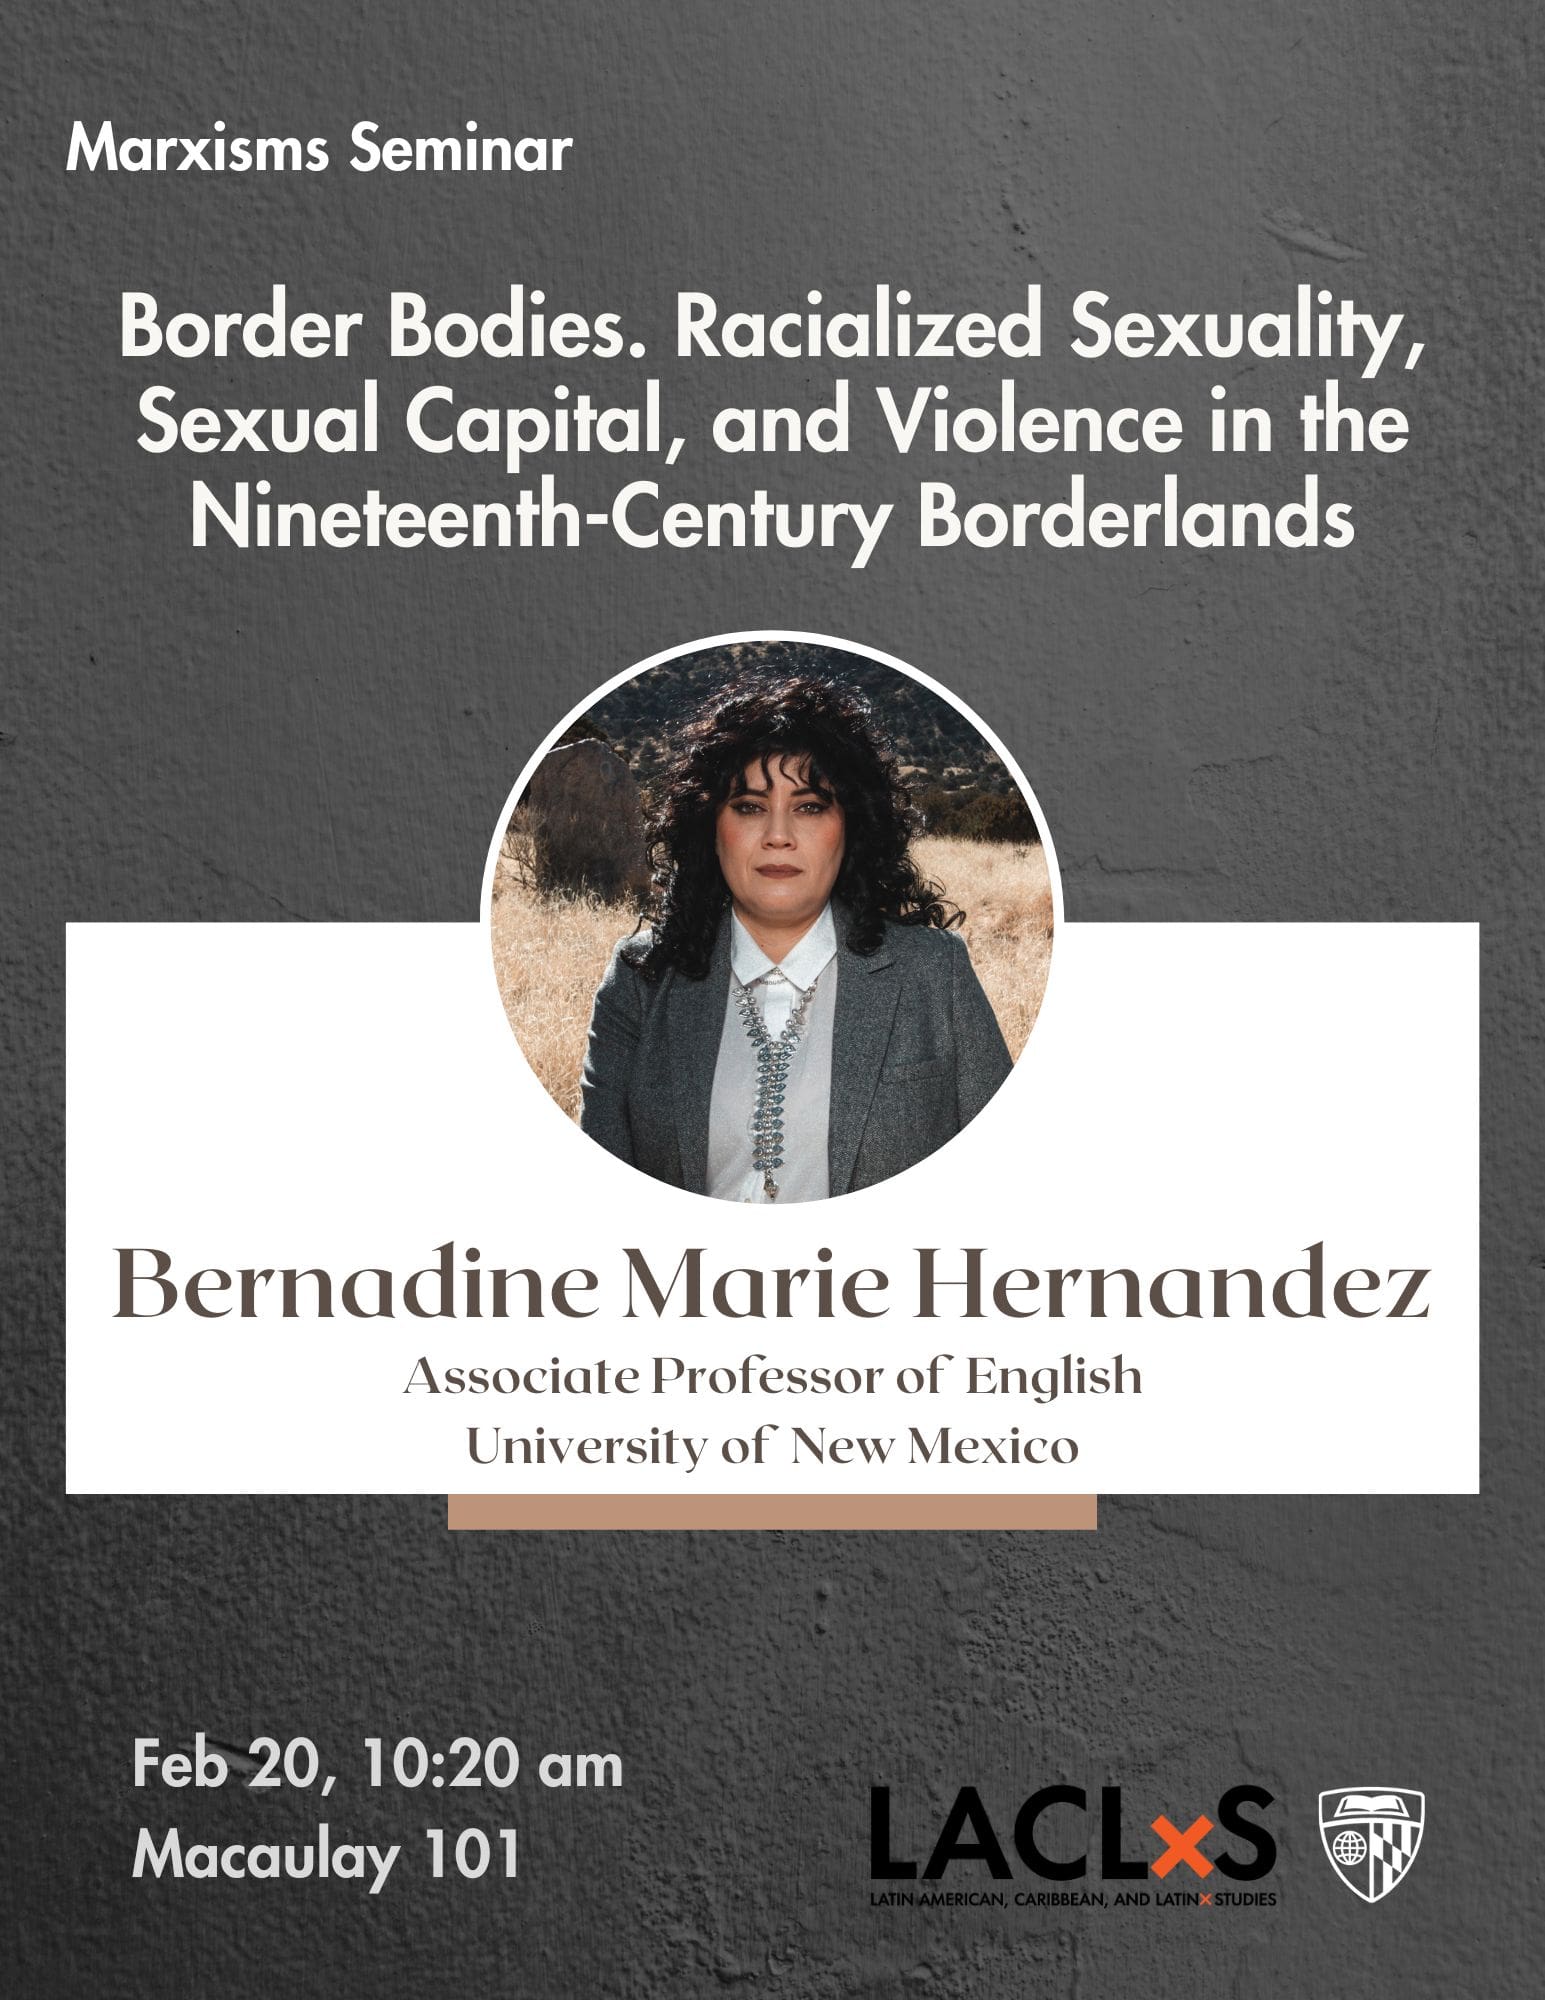 Border Bodies. Racialized Sexuality, Sexual Capital, and Violence in the Nineteenth-Century Borderlands, by Bernadine Marie Hernandez